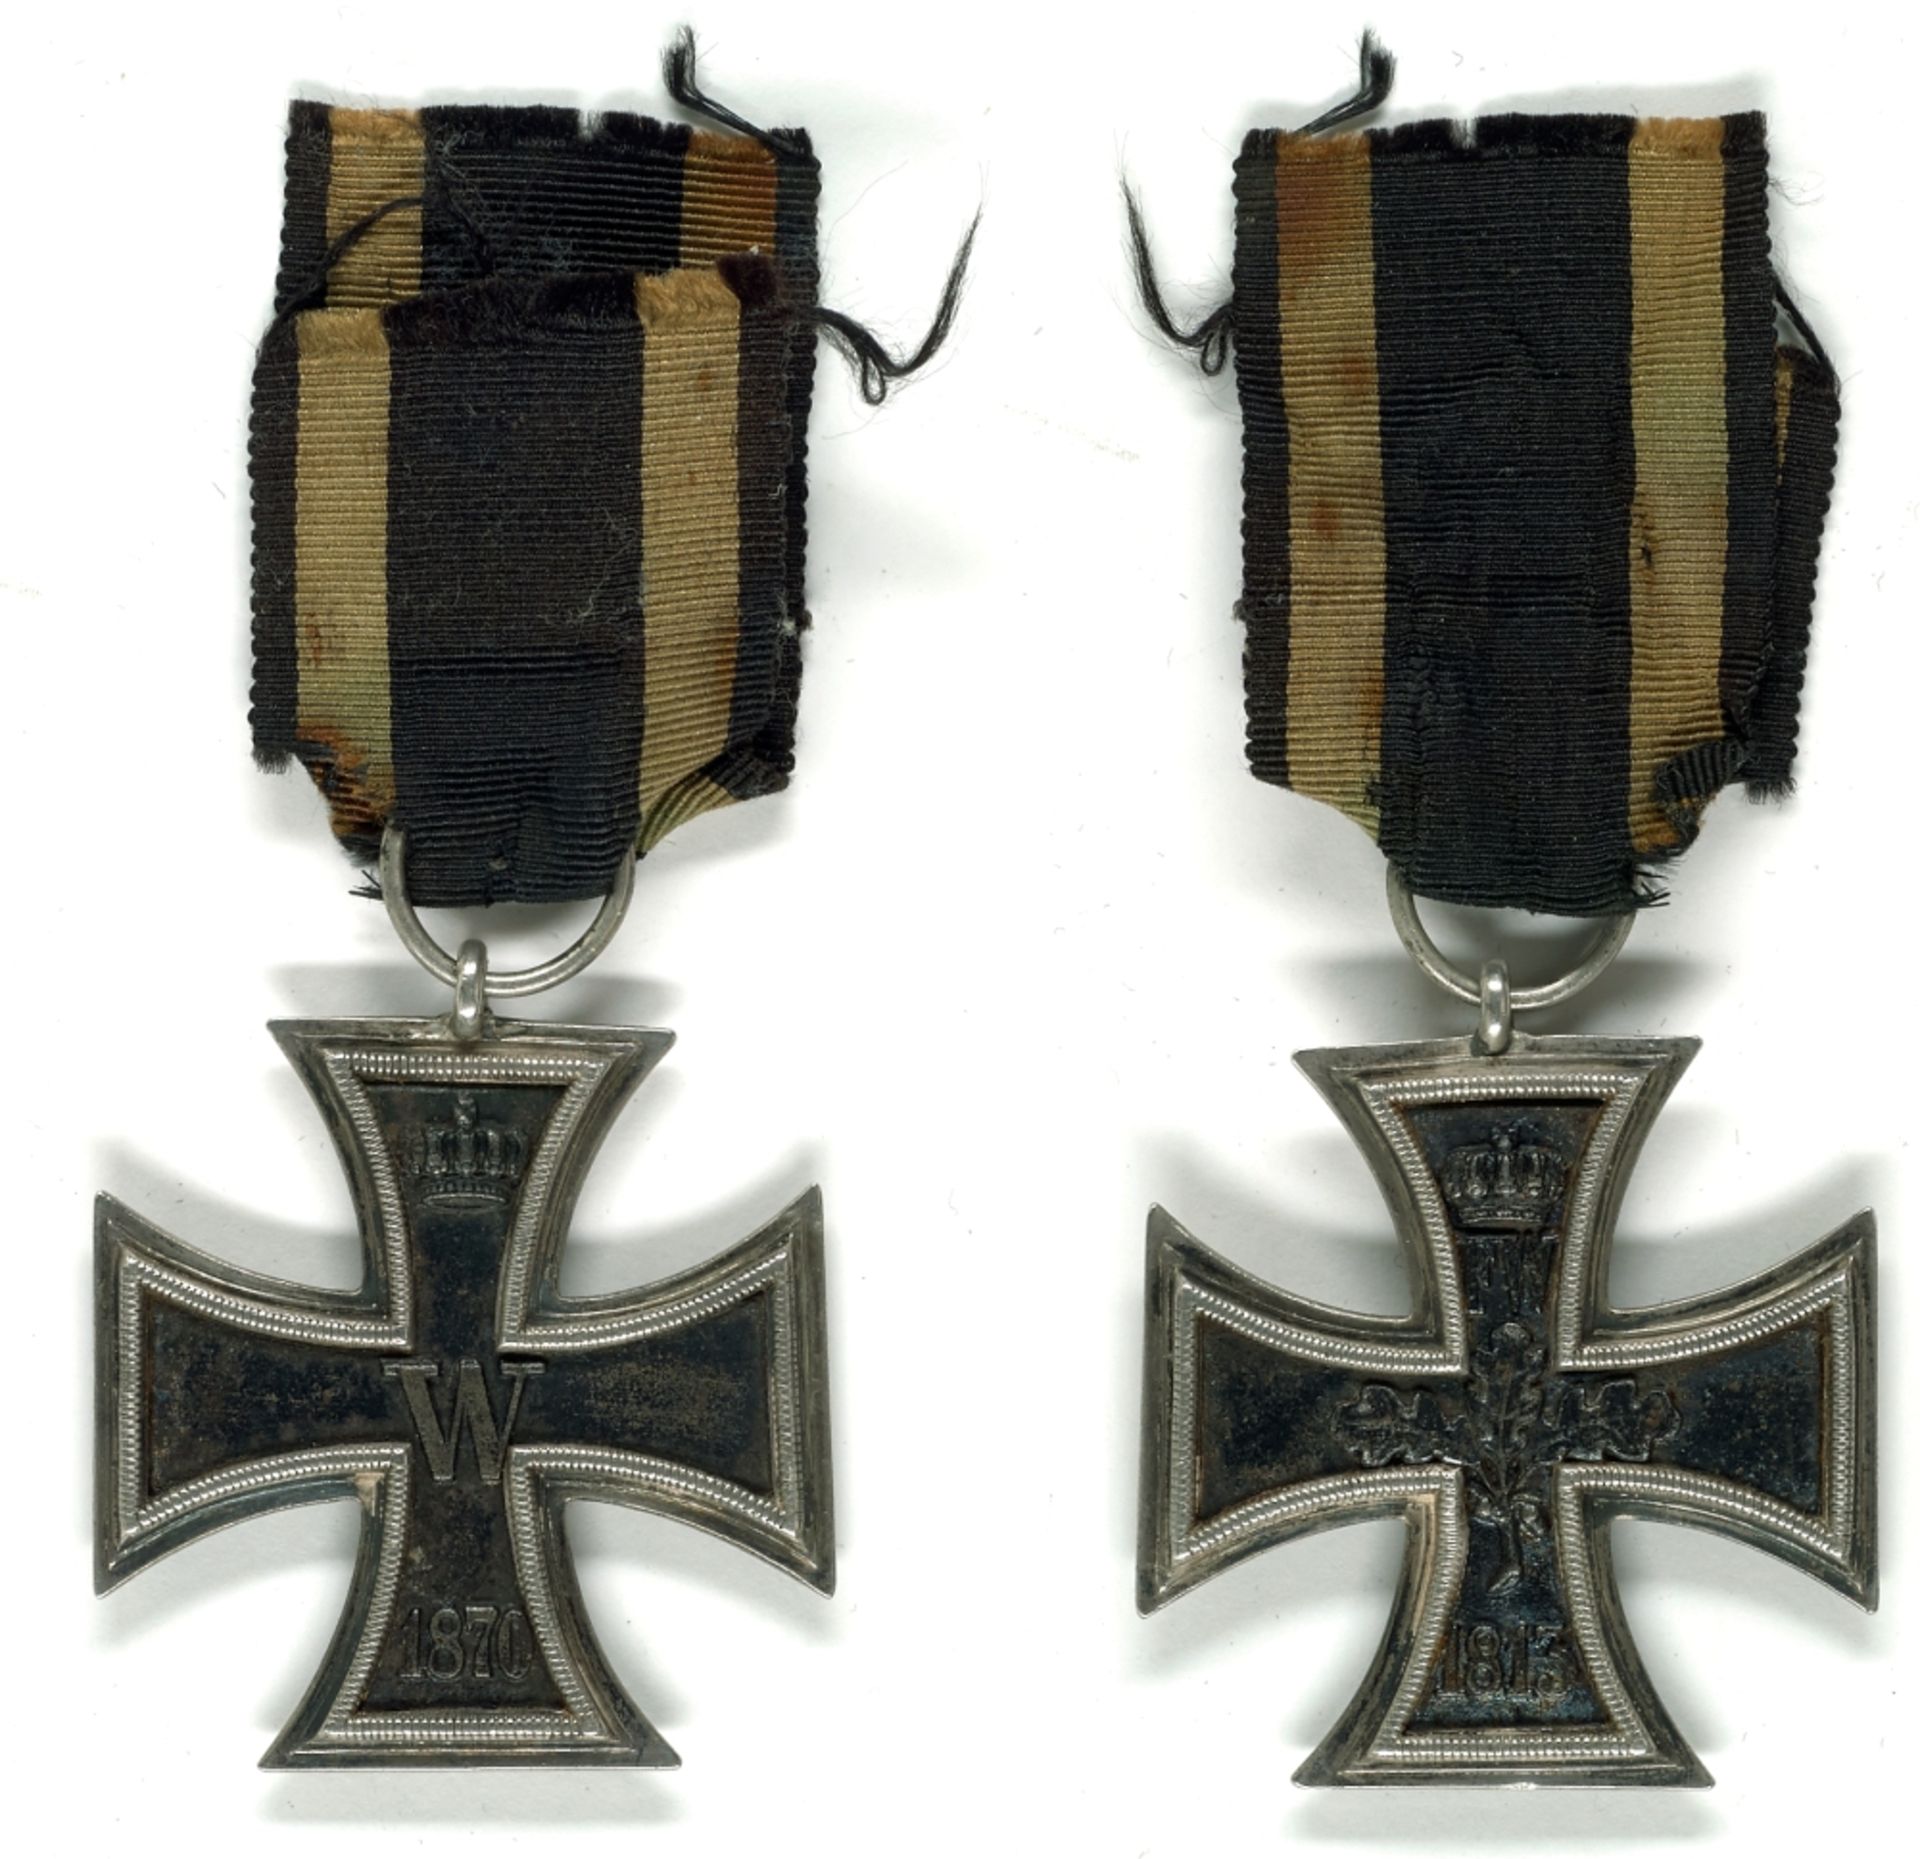 Prussia, Iron Cross 1870 2. Class, with ribbon, OEK 1904, blackening faded, volume with strong